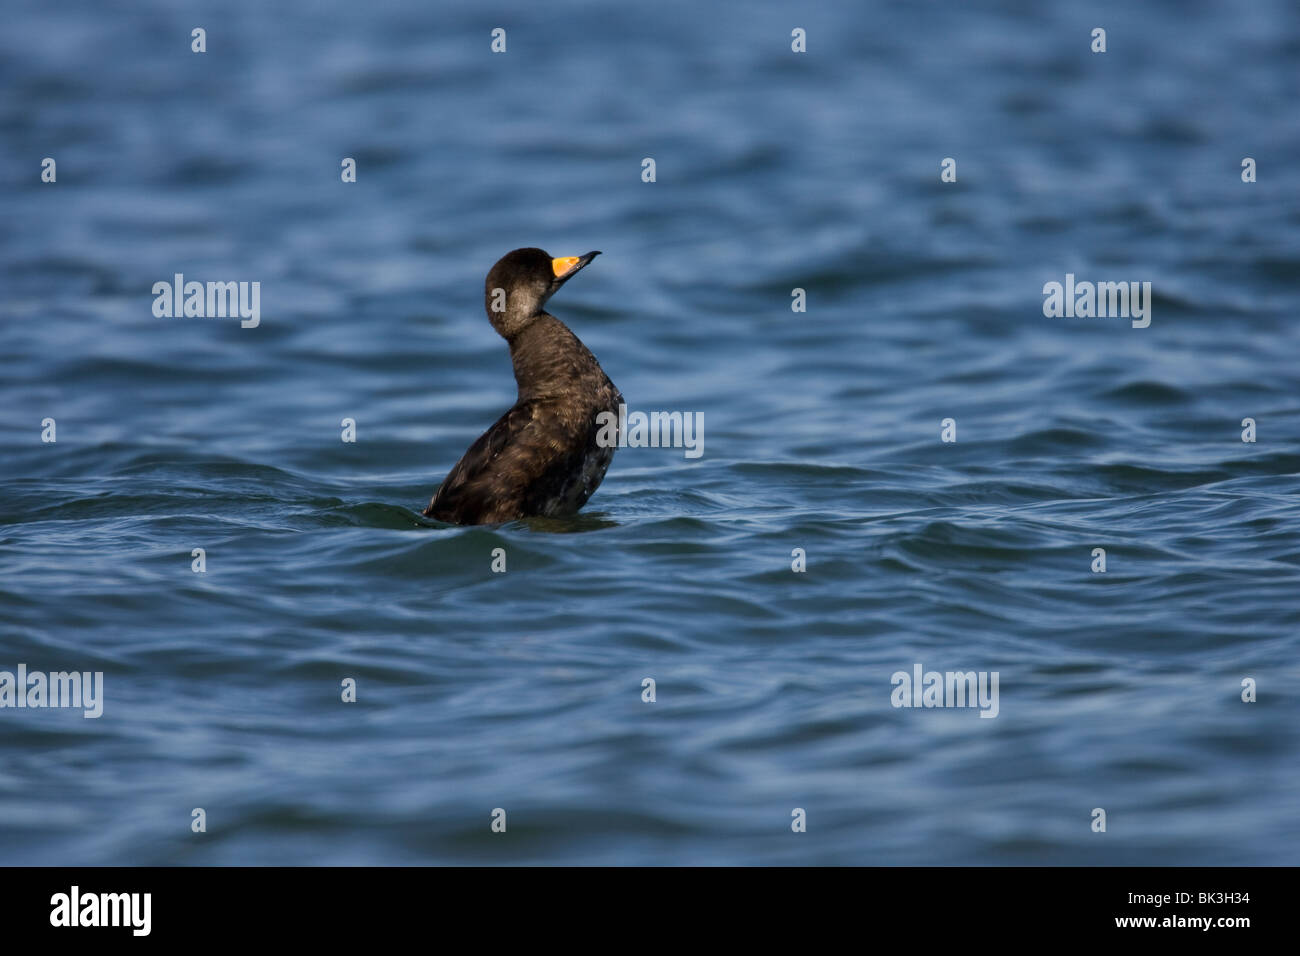 Black Scoter (Melanitta nigra americana), American subspecies, male rearing out of water to flap wings. Stock Photo